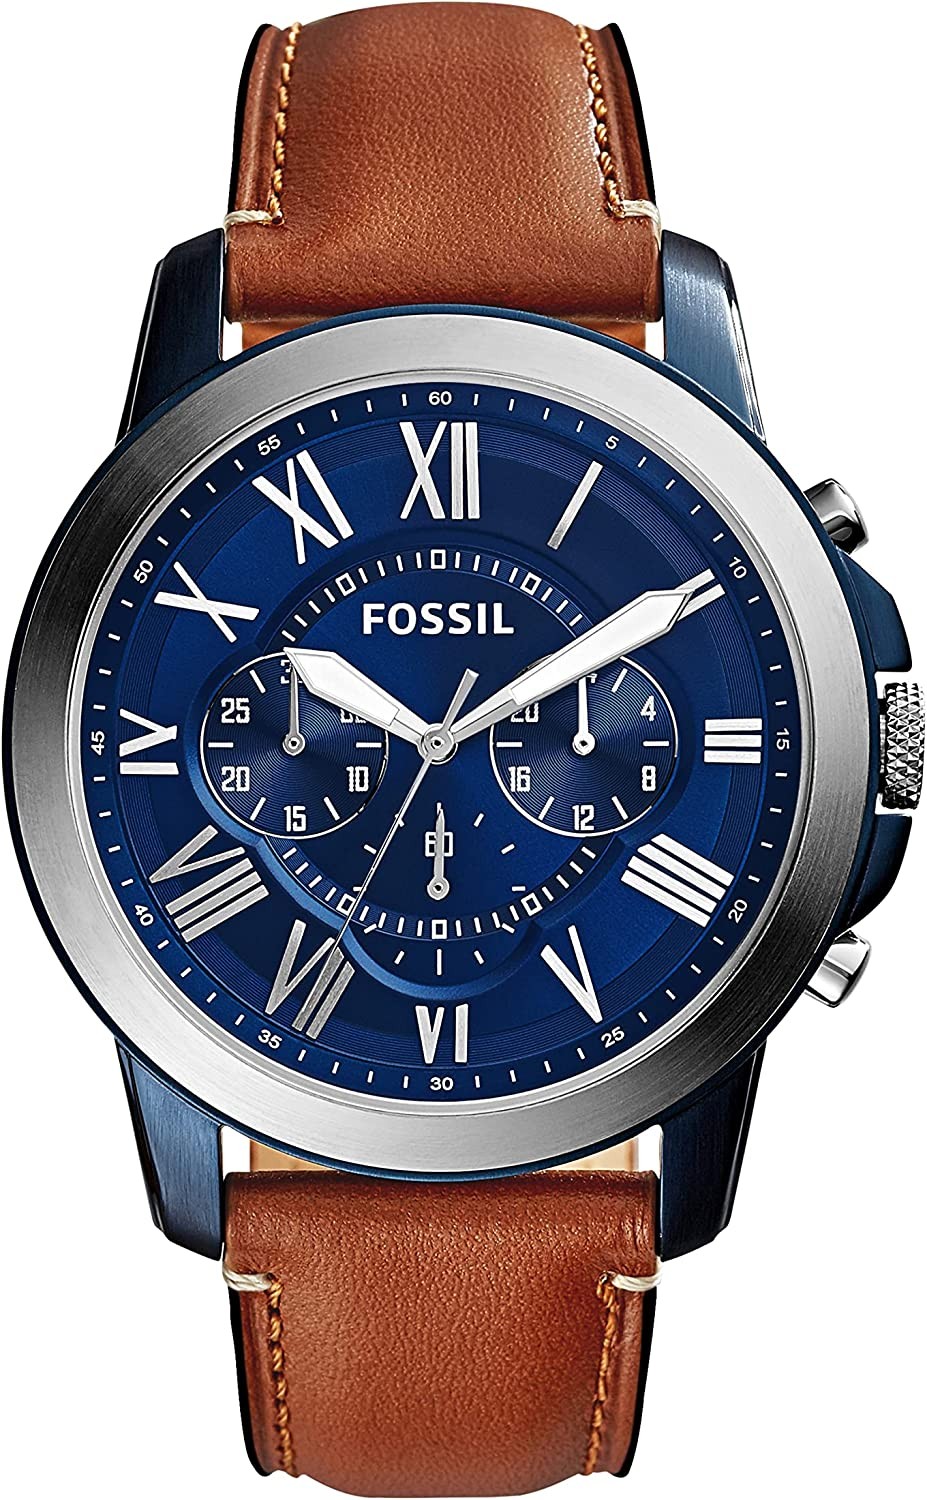 Fossil Grant Men's Watch with Chronograph Display and Genuine Leather ...